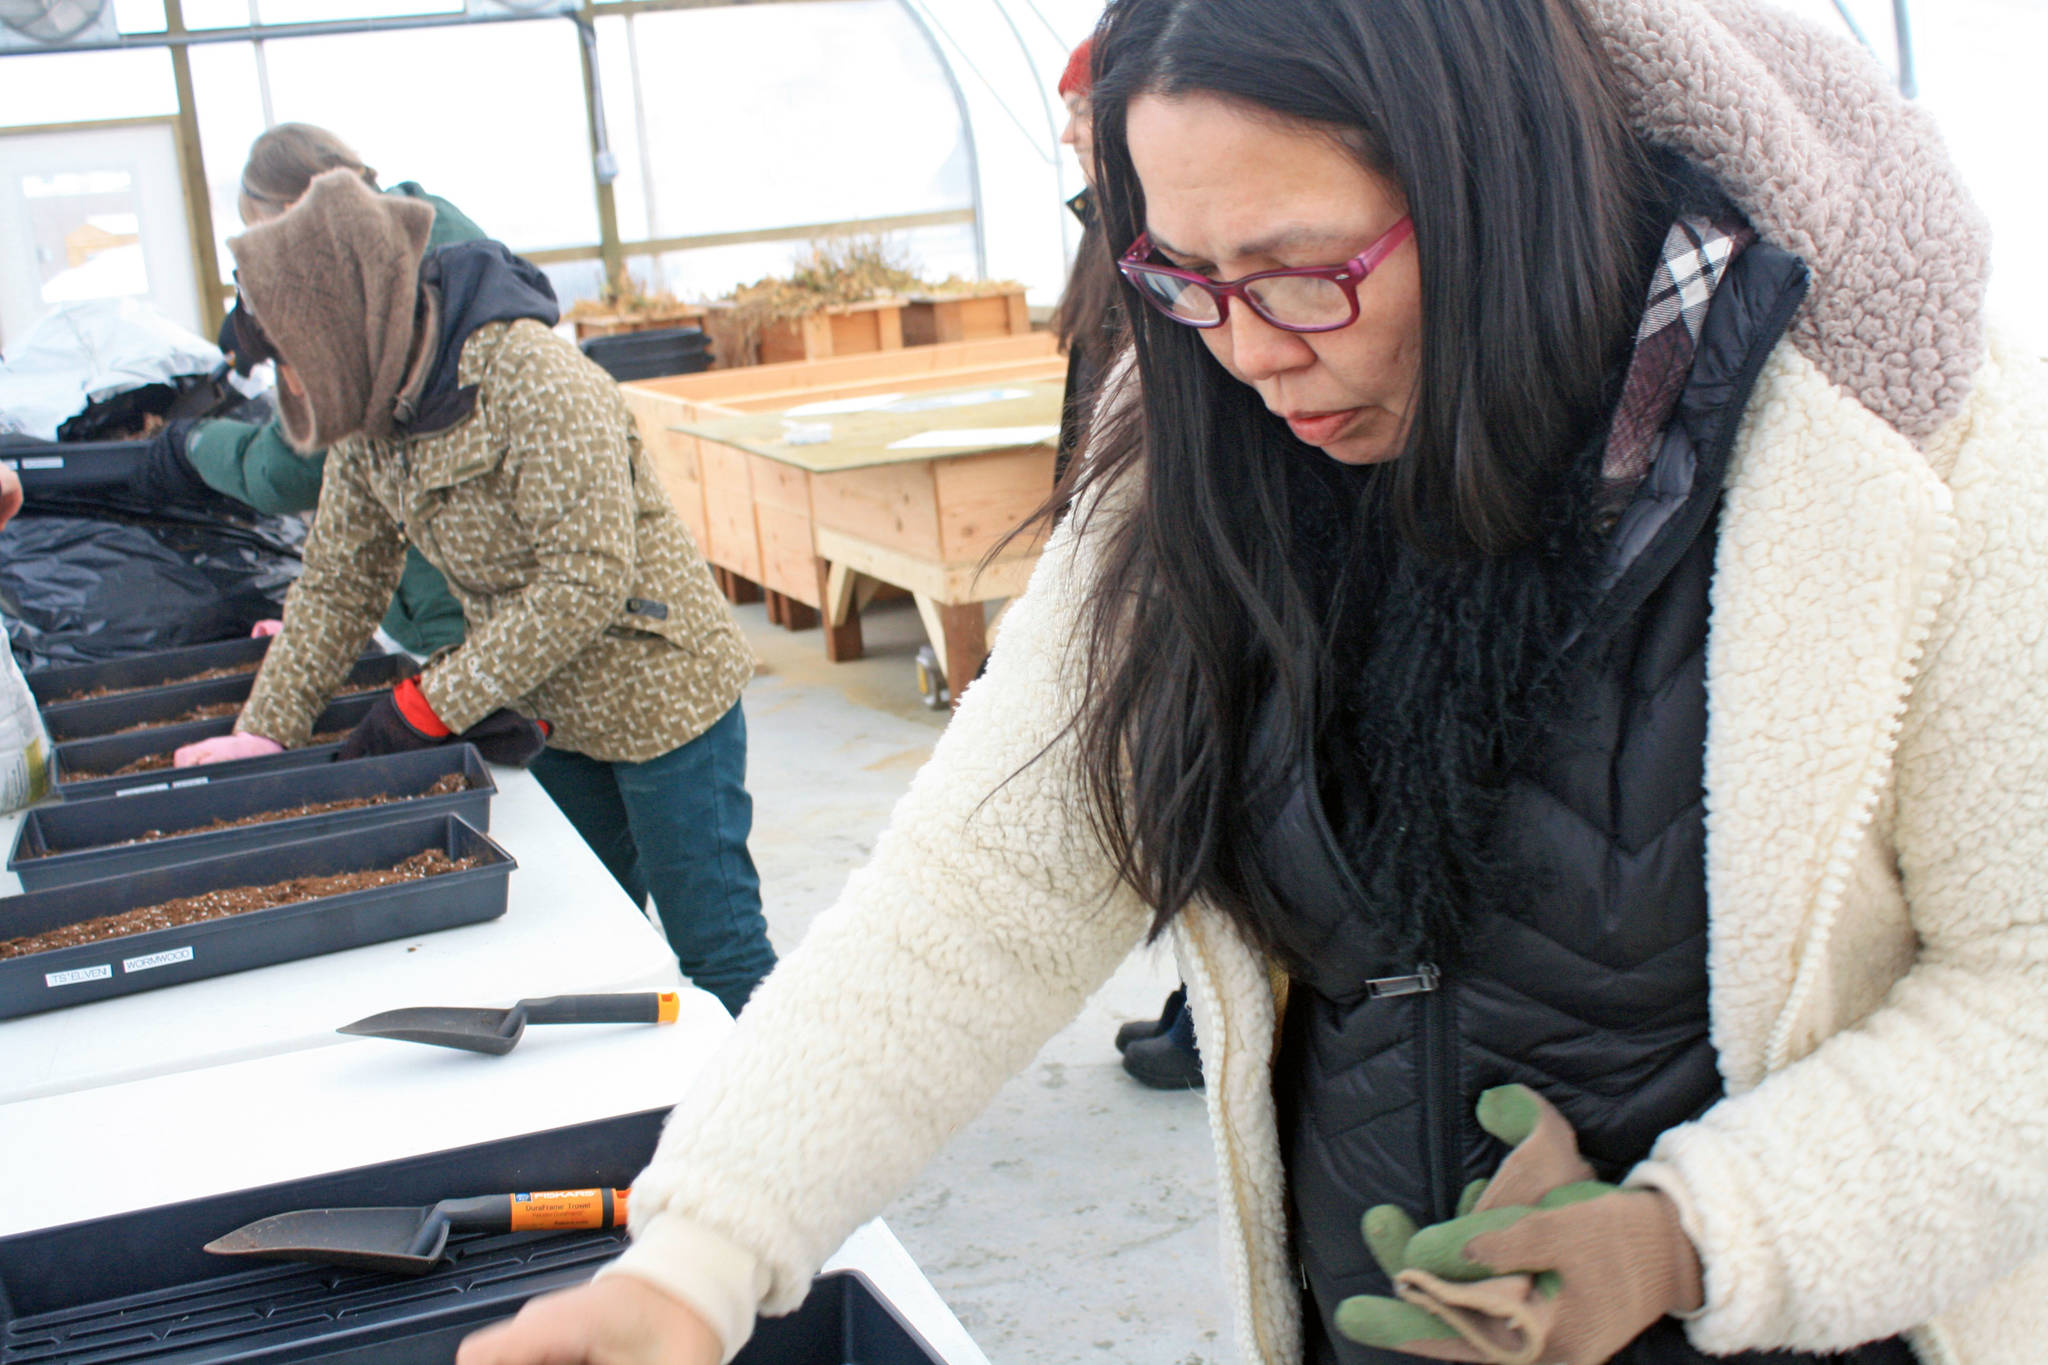 Tia Holley, a wellness consultant at the Dena’ina Wellness Center, plants seeds gathered locally at a demonstration at the wellness center’s greenhouse on Thursday, Jan. 25. (Photo by Erin Thompson/Peninsula Clarion)